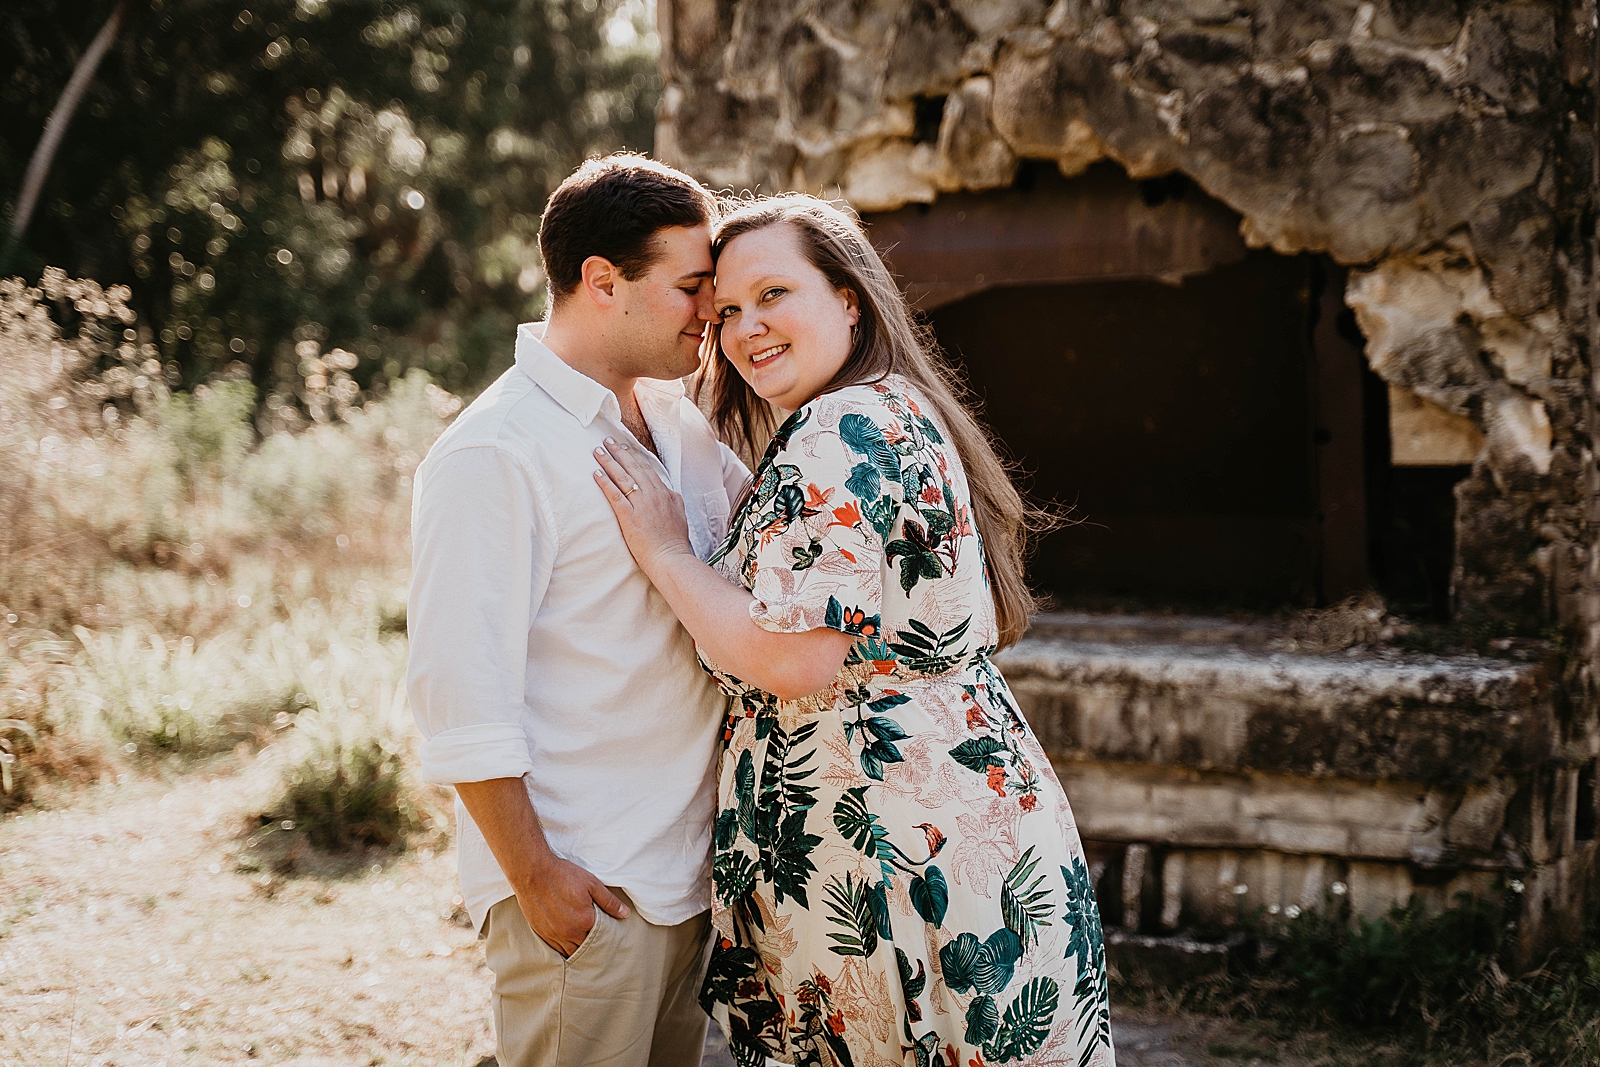 Man nuzzling his head against woman's in front of ruined chimney Riverbend Park Engagement Photography captured by South Florida Engagement Photographer Krystal Capone Photography 